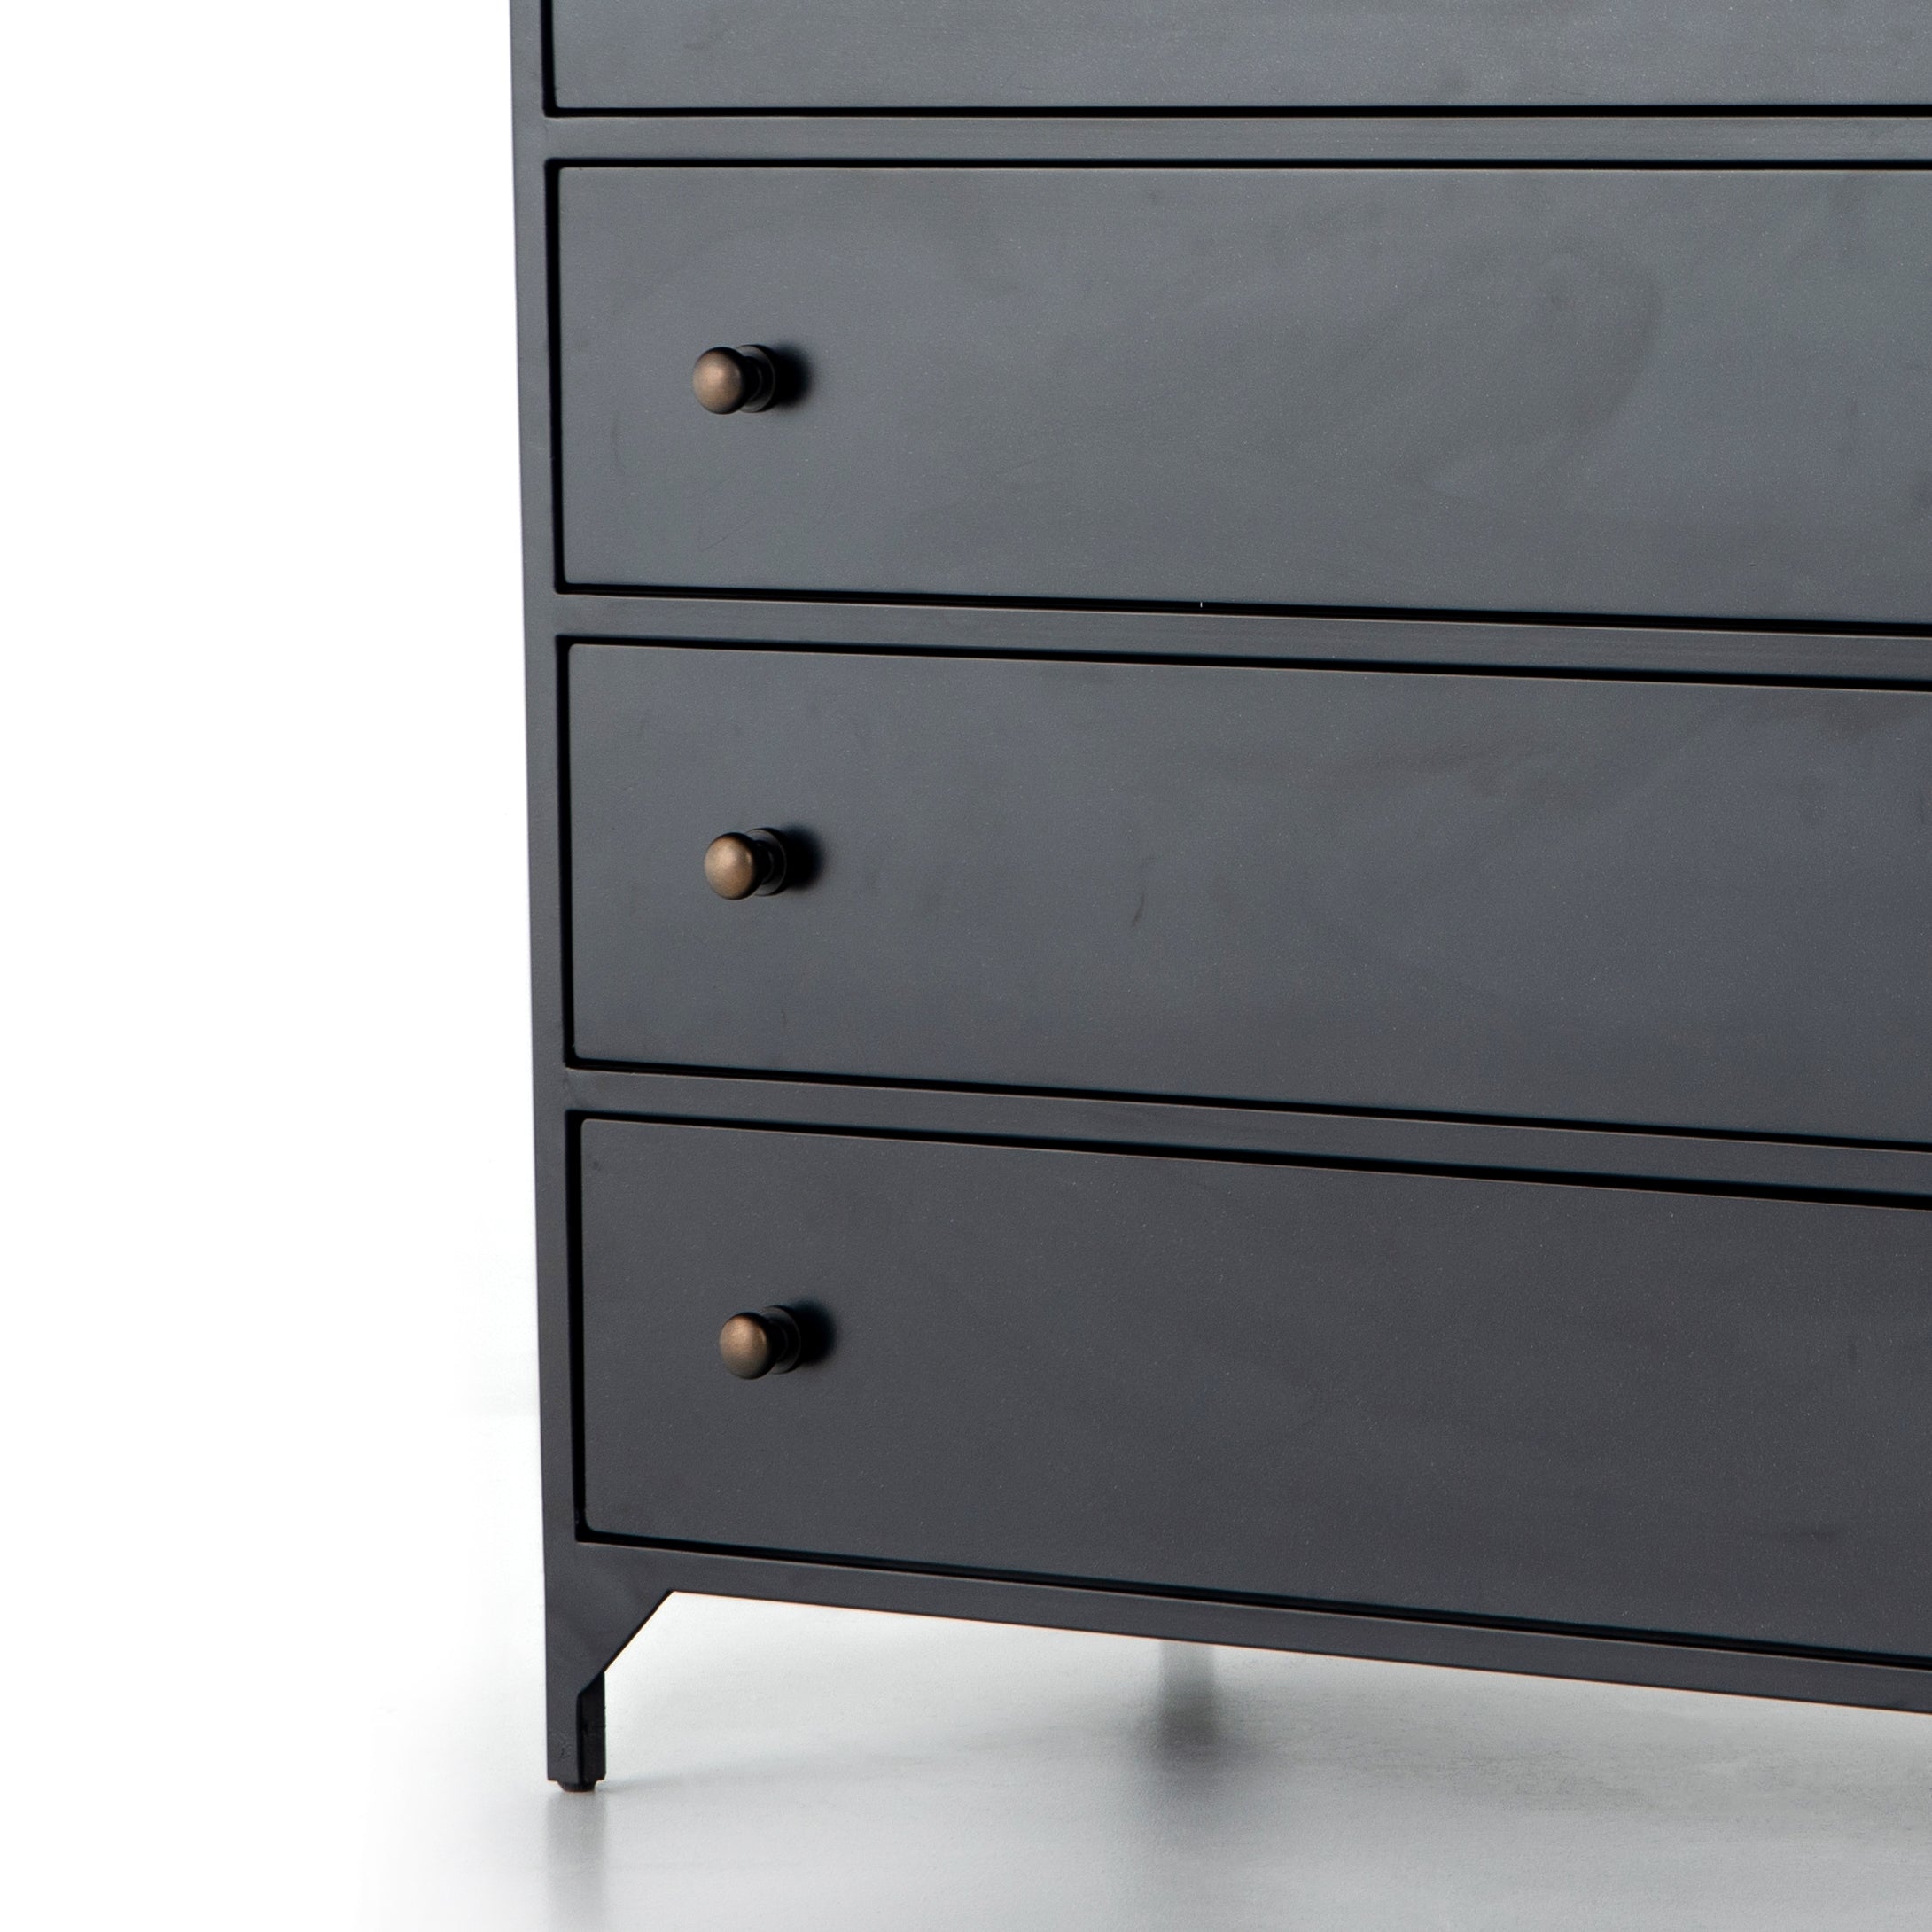 Sleek and industrial-inspired, this Belmont 8 Drawer Tall Dresser has black iron that forms a tall, spacious eight-drawers dresser. The brass knobs bring a cool contrast to any bedroom.   Overall Dimensions: 35.50